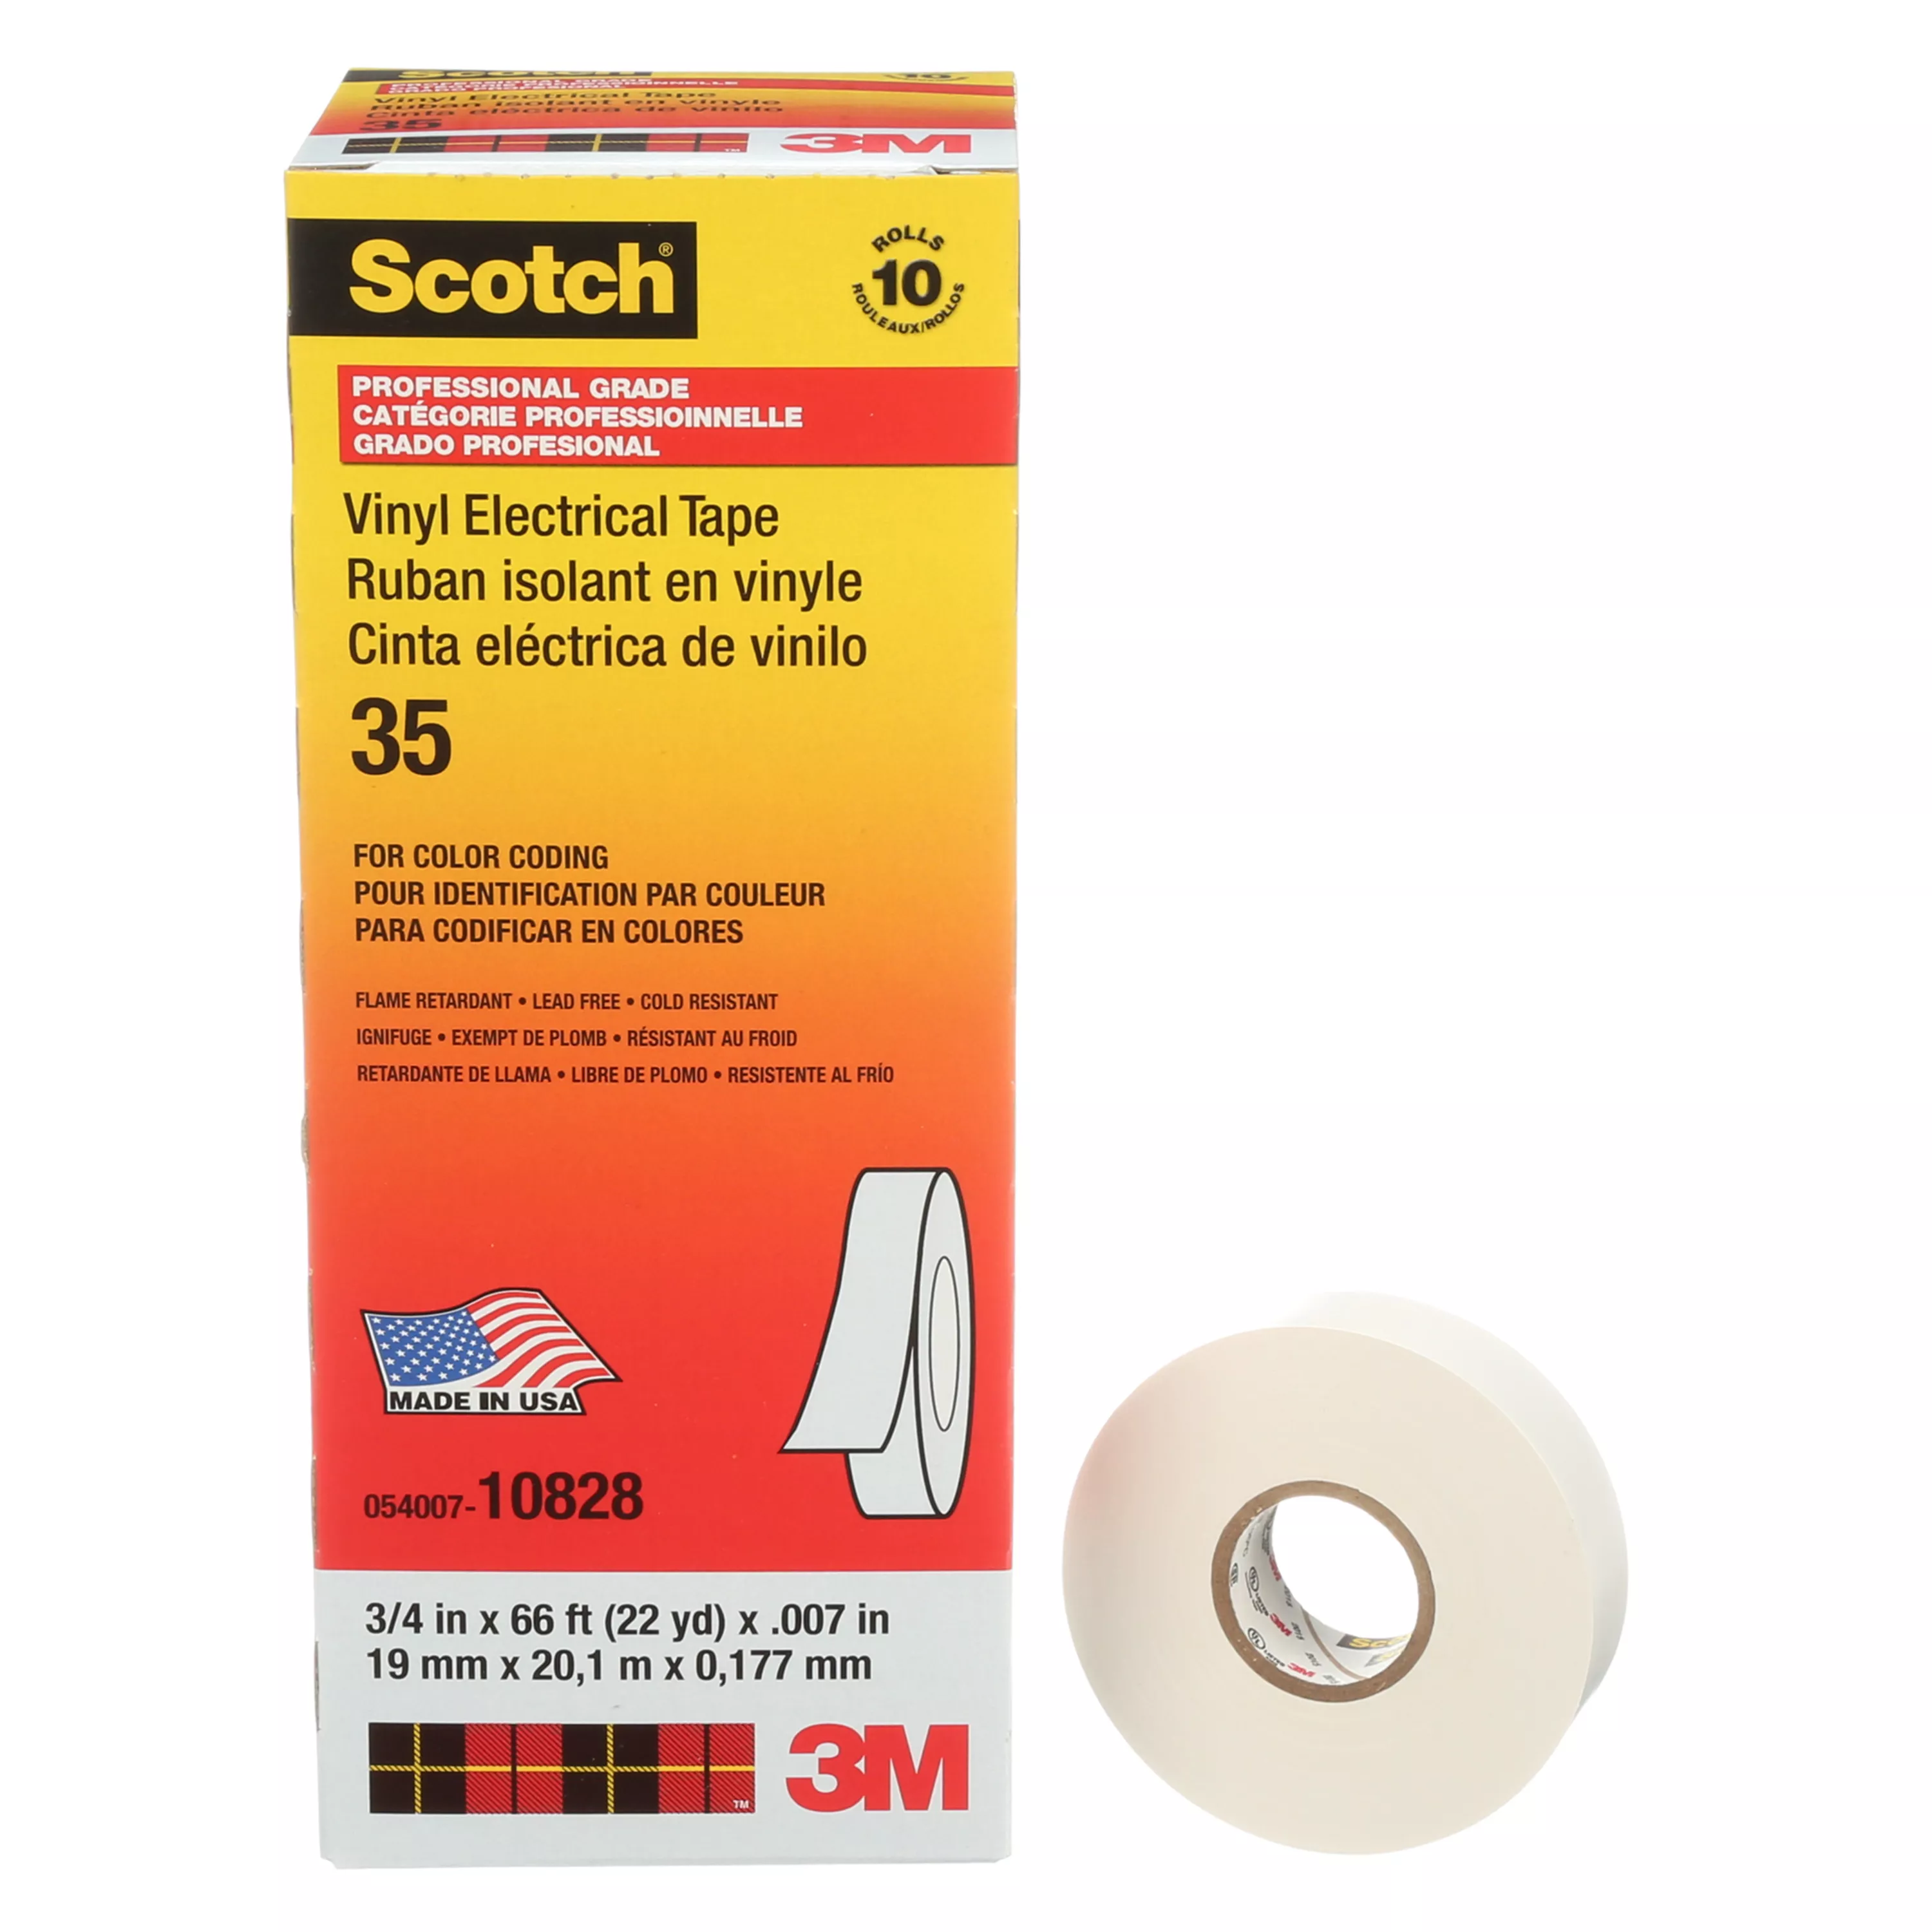 Scotch® Vinyl Color Coding Electrical Tape 35, 3/4 in x 66 ft, White, 10
rolls/carton, 100 rolls/Case